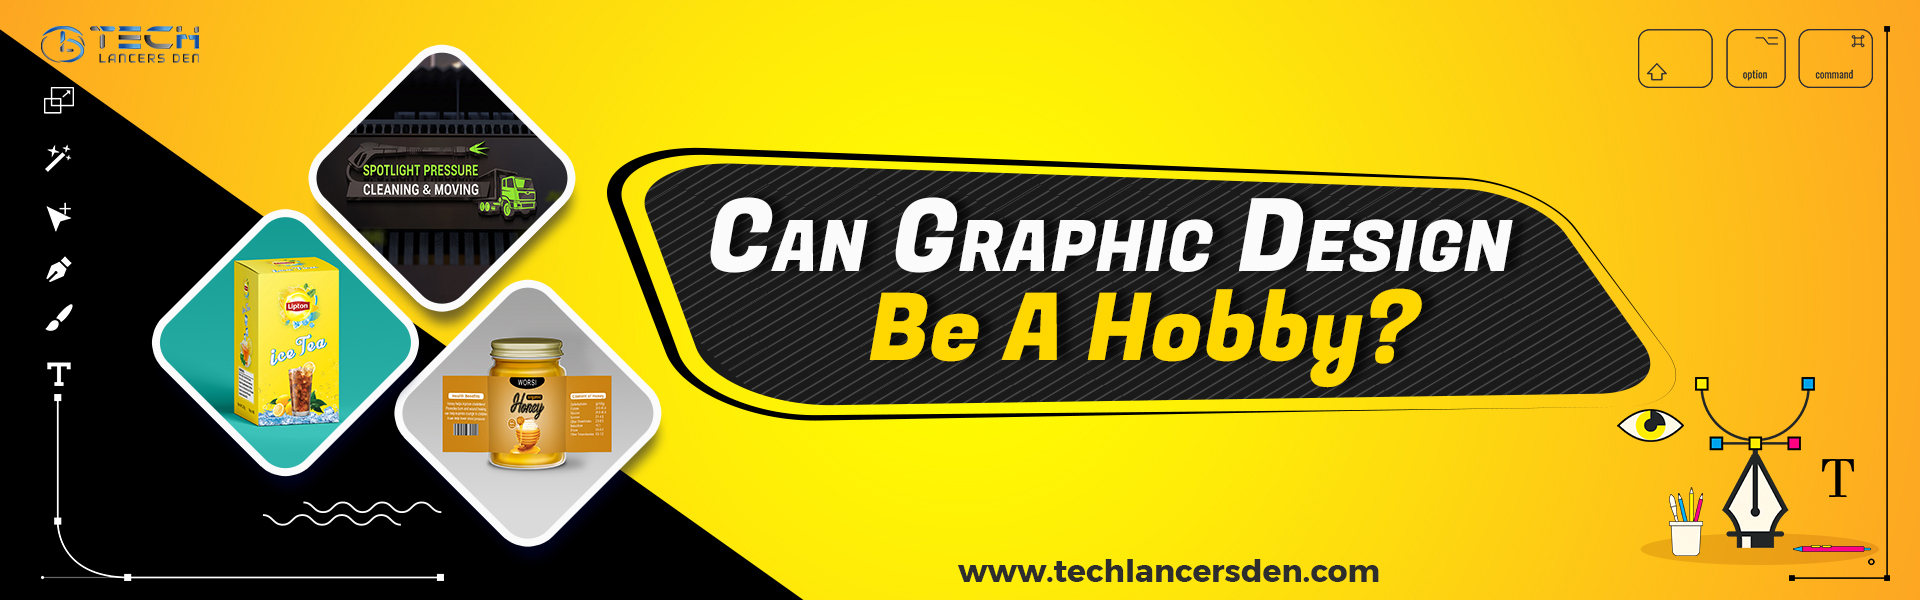 Can-Graphic-Design-Be-A-Hobby